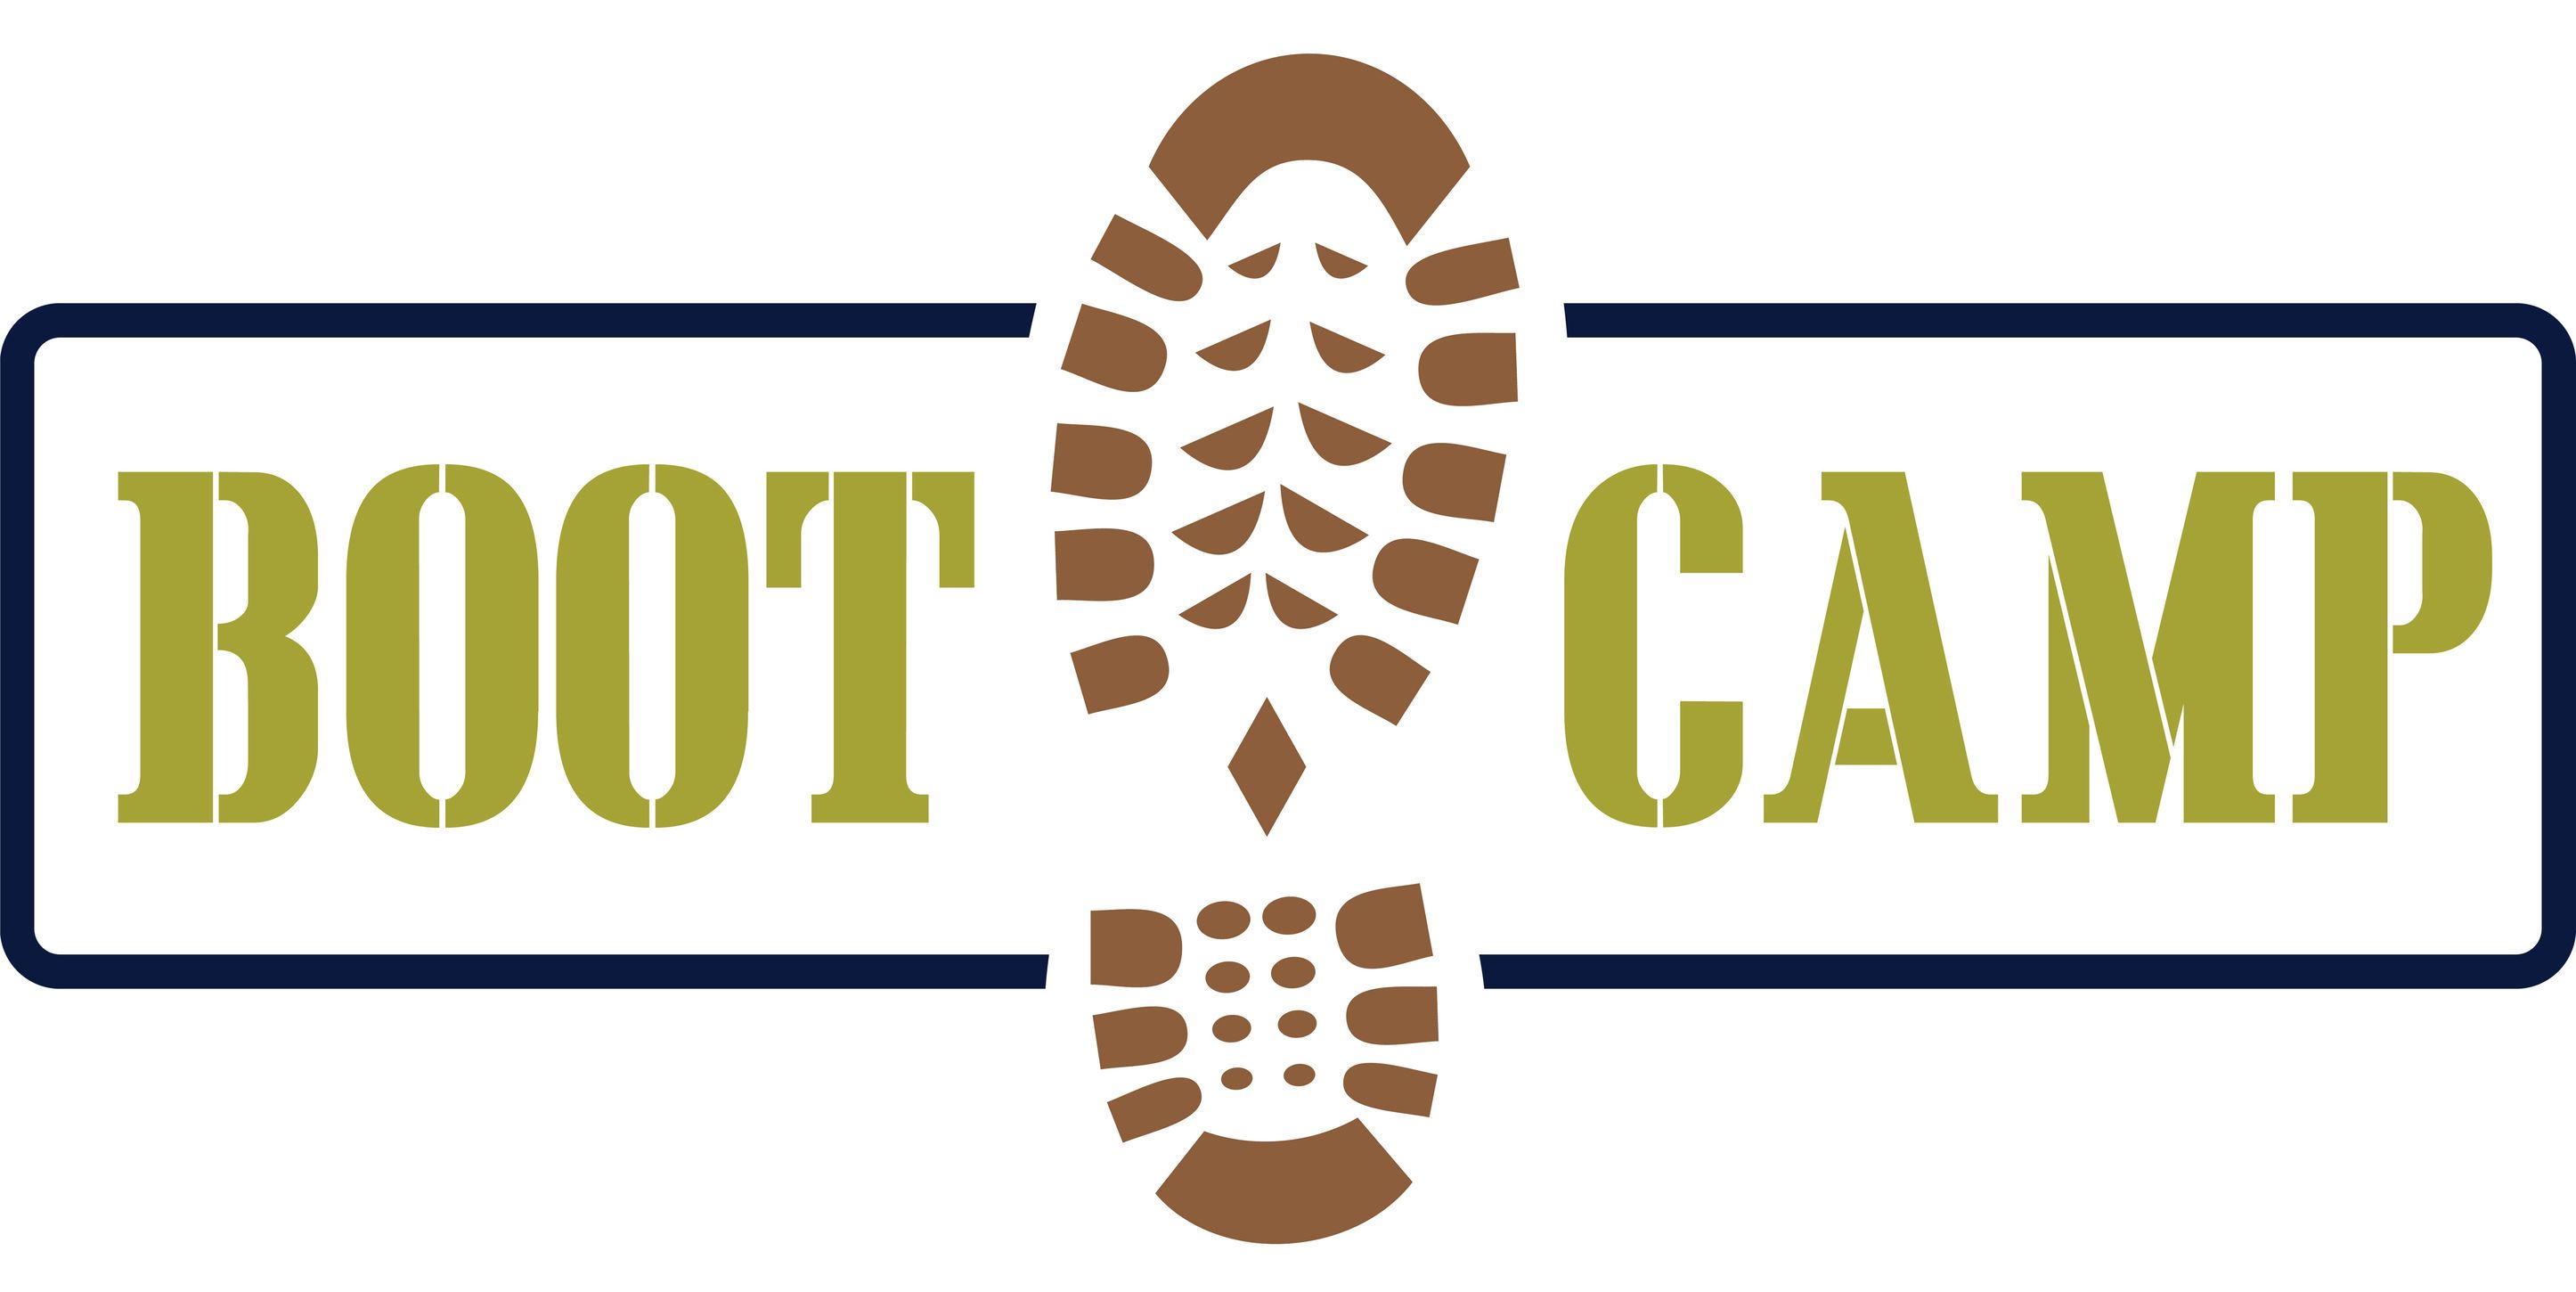 military clipart army boot camp